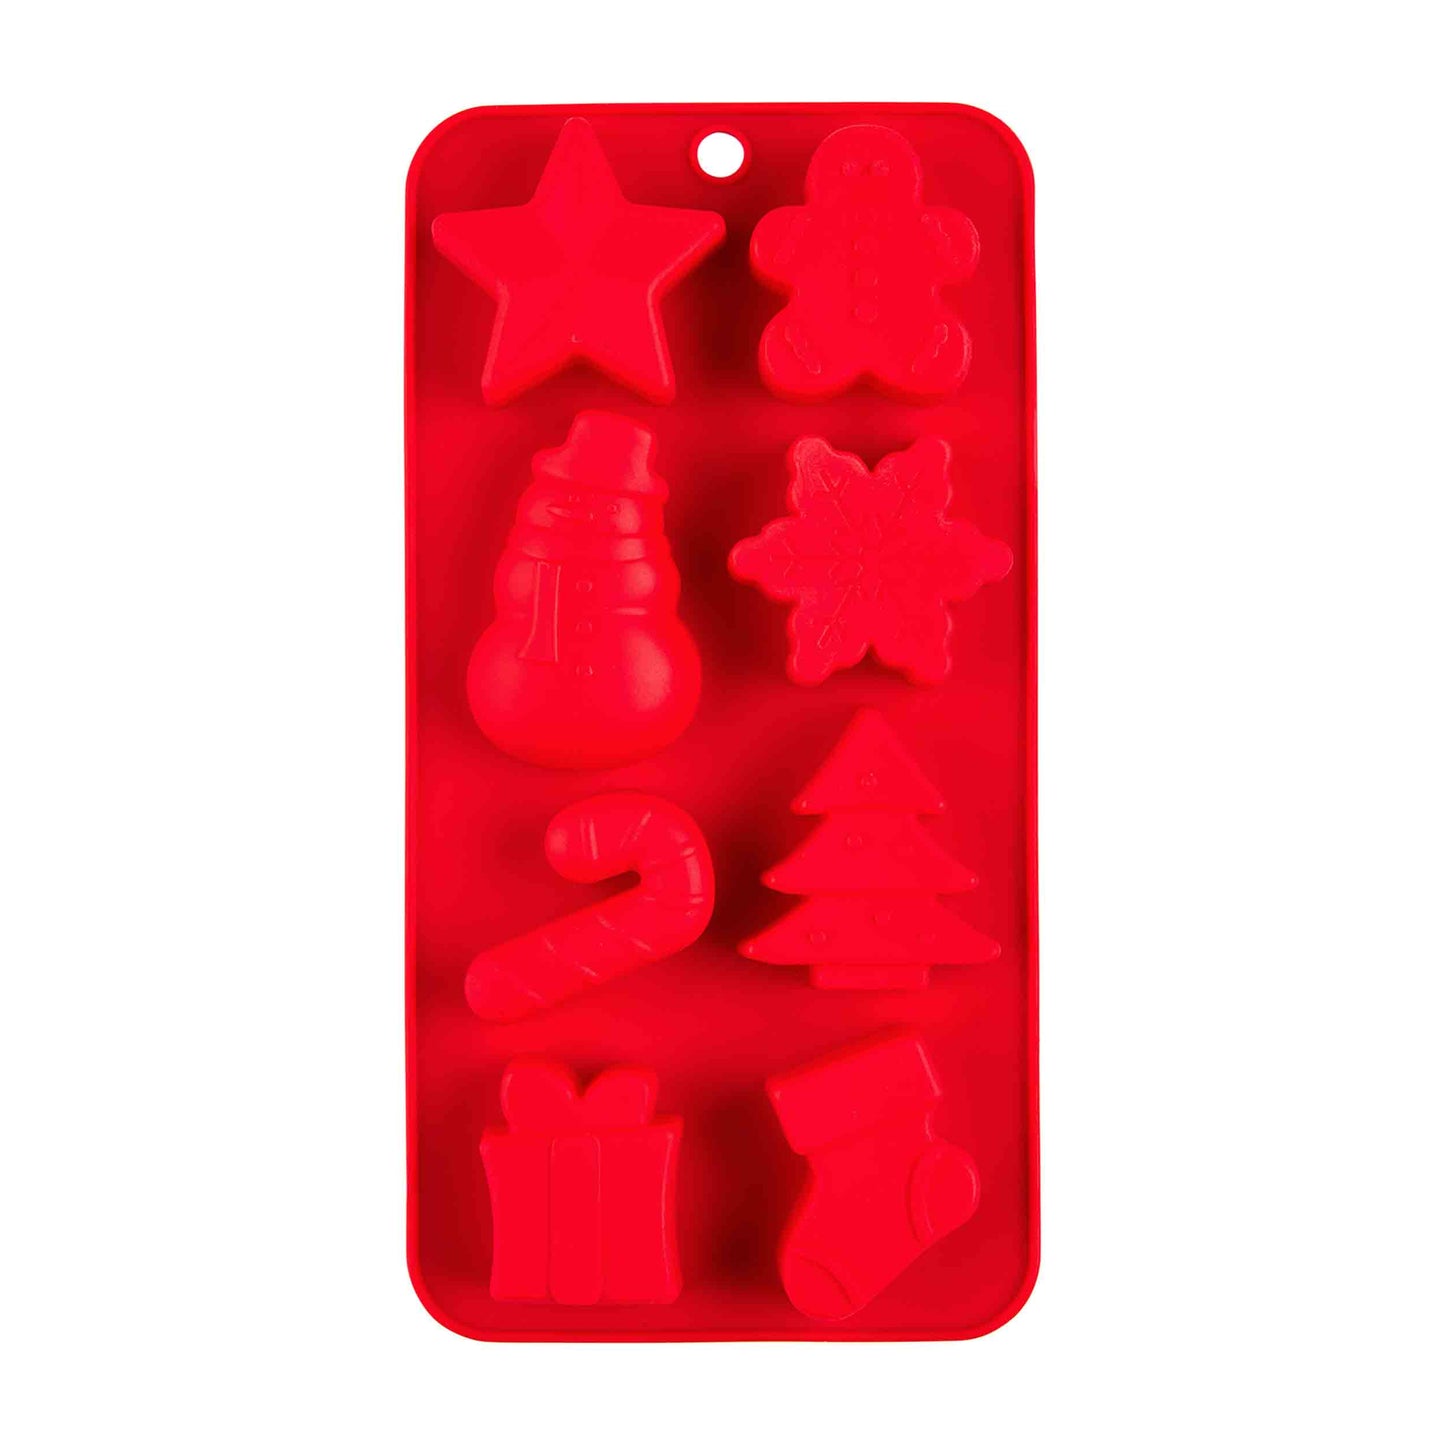 Red Silicone Mold Set